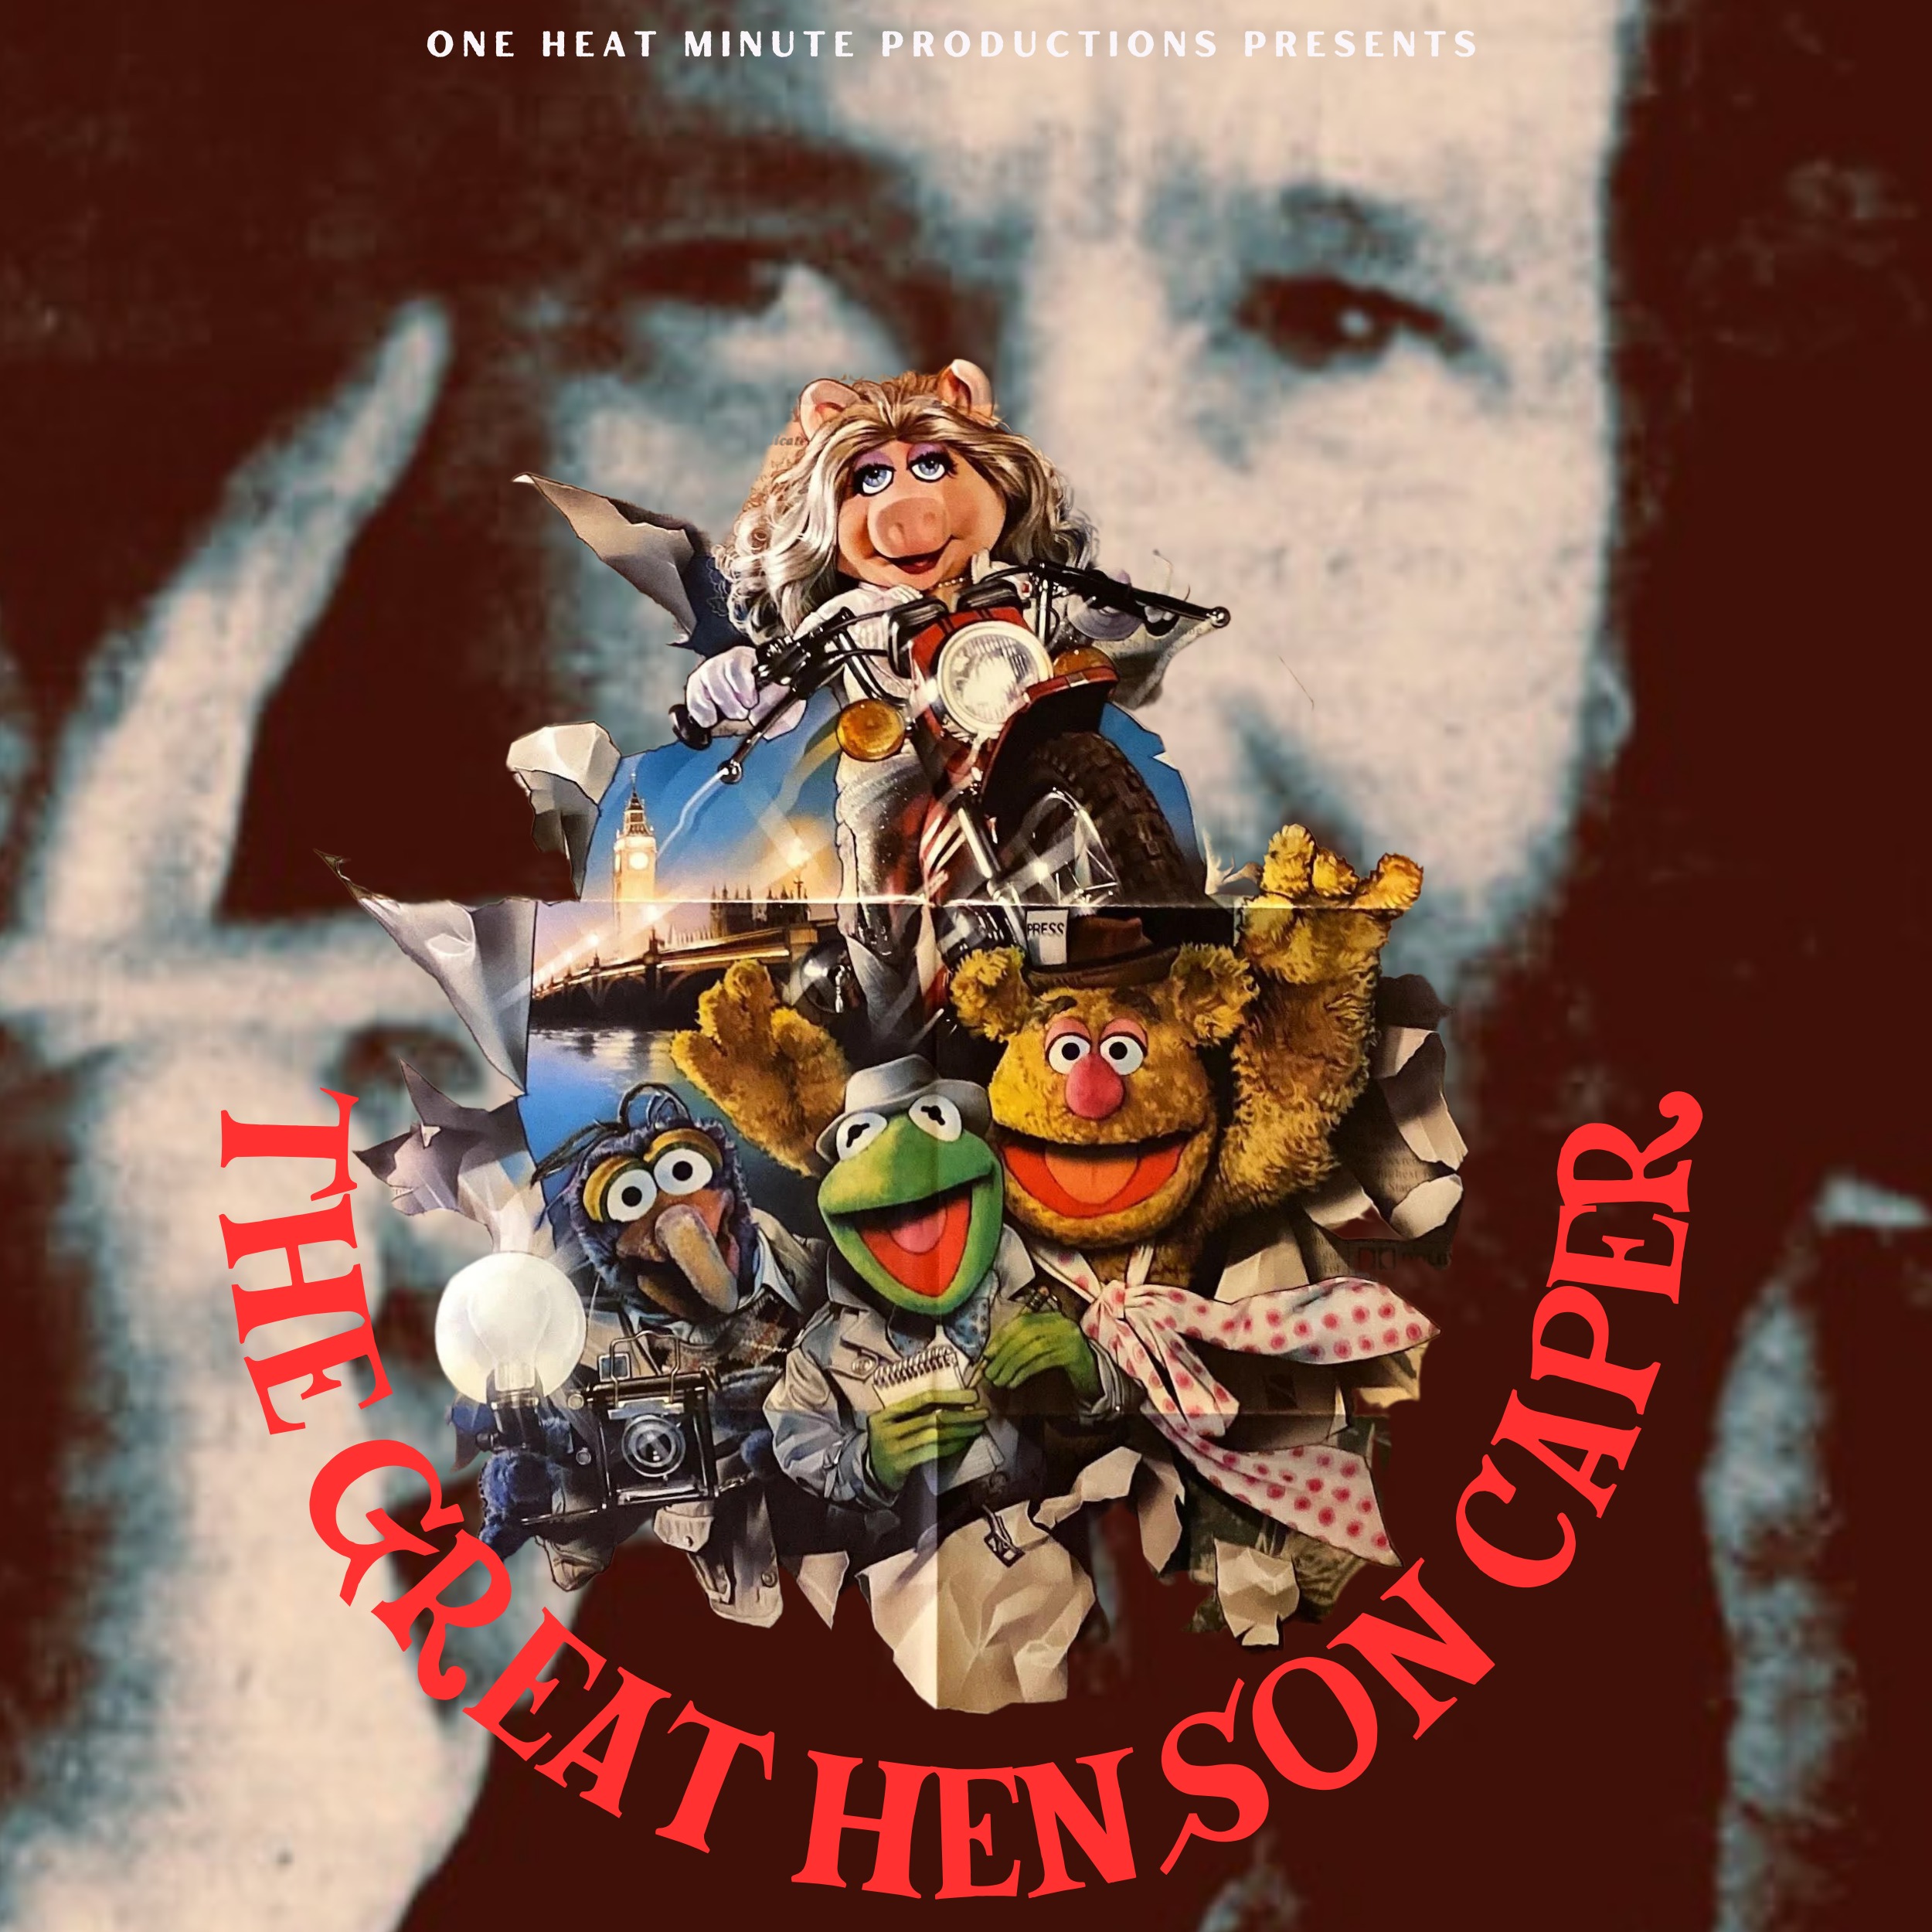 THE GREAT HENSON CAPER PART 3: THE MUPPET SHOW